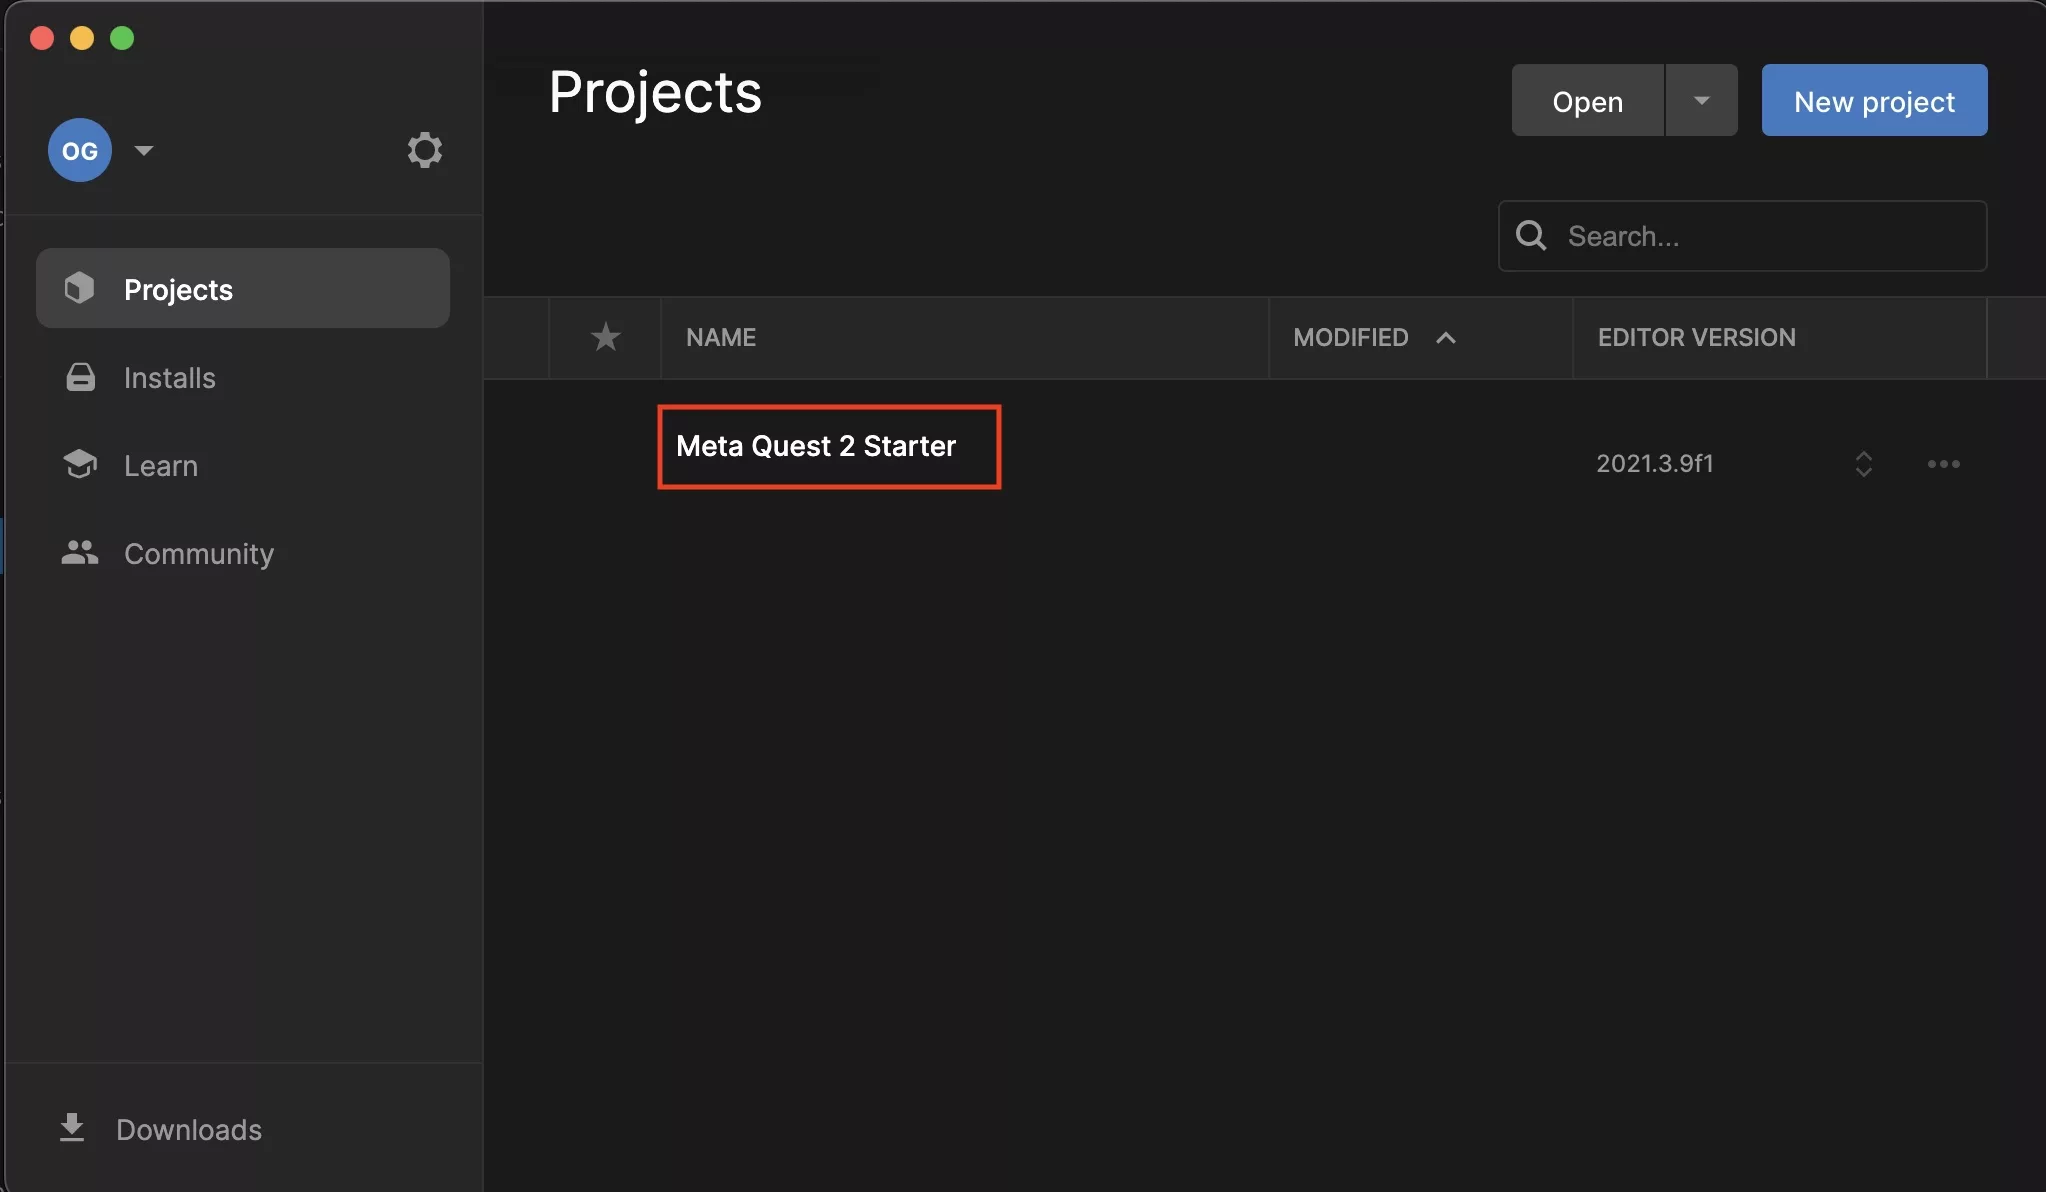 A screenshot of Unity suggesting how to open a project.